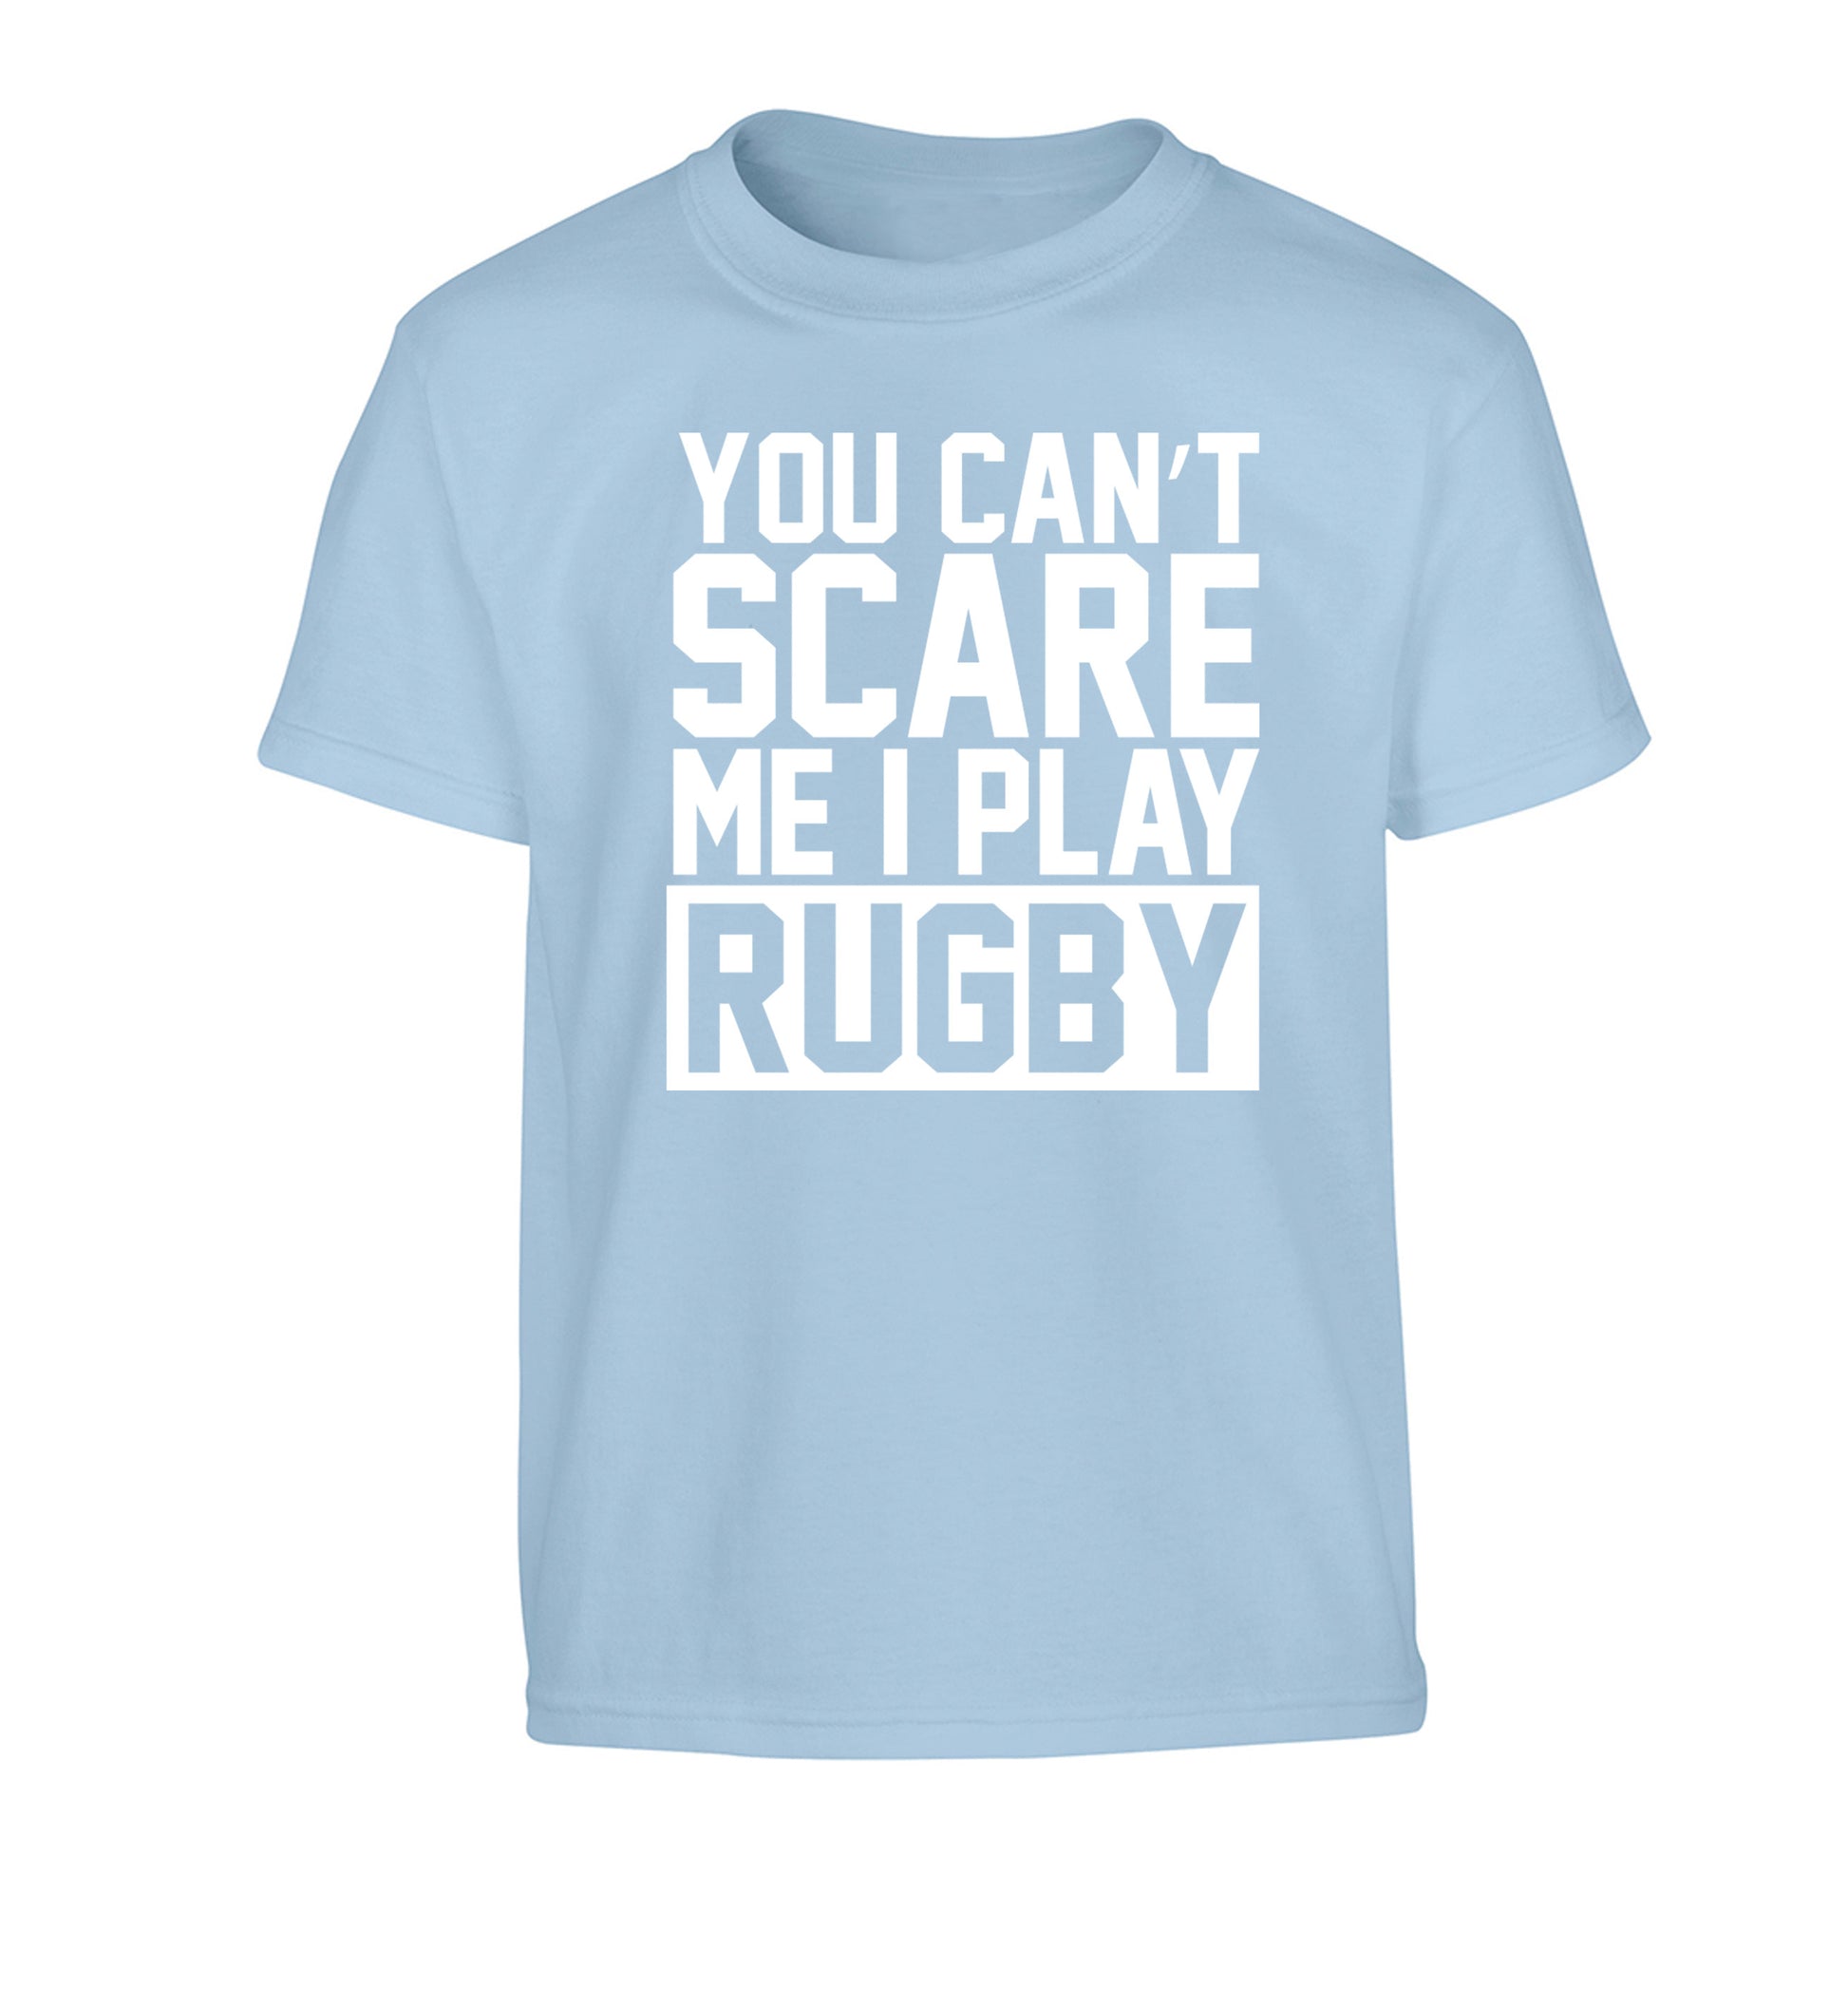 You can't scare me I play rugby Children's light blue Tshirt 12-14 Years